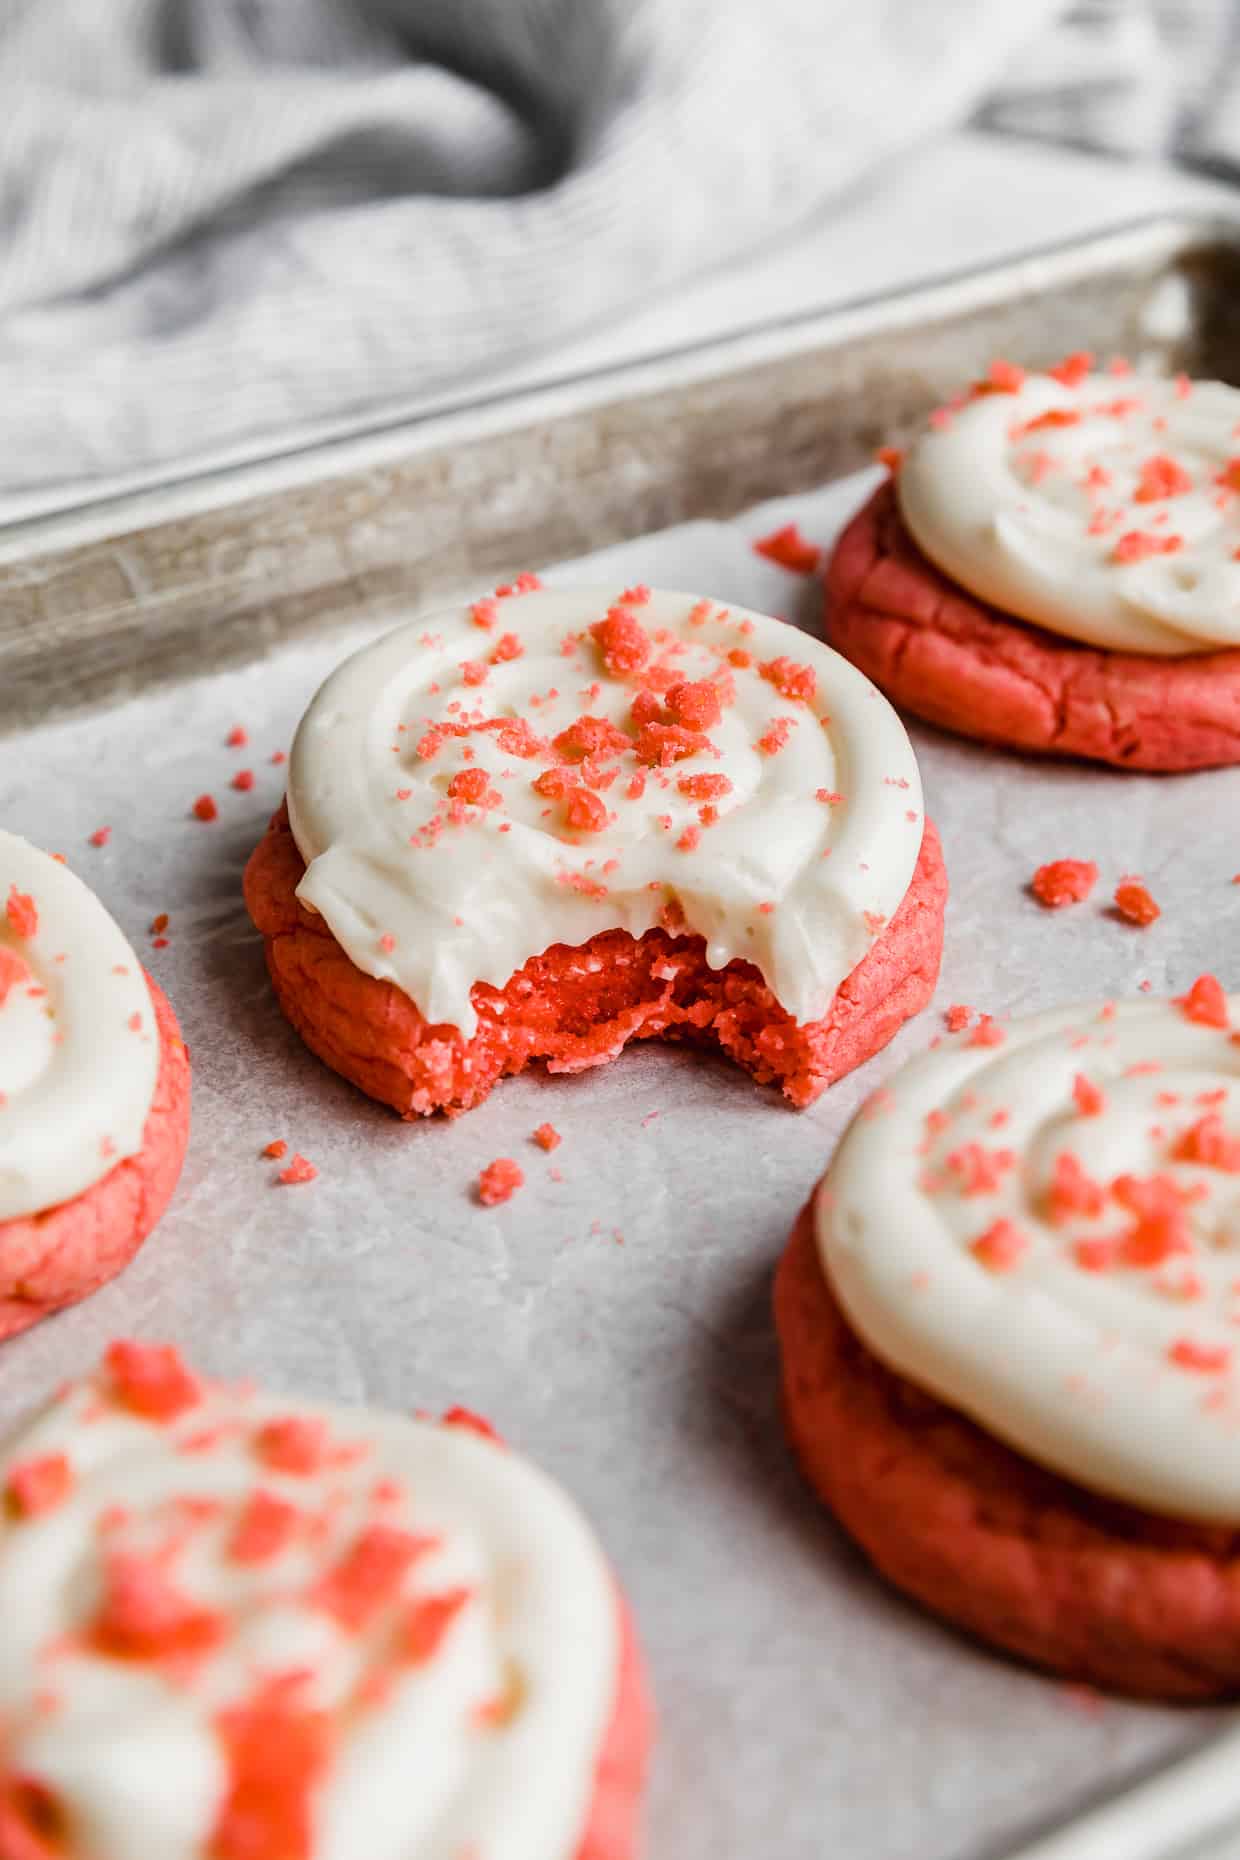 A Crumbl Pink Velvet Cookie topped with cream cheese frosting with a bite taken out of the cookie.